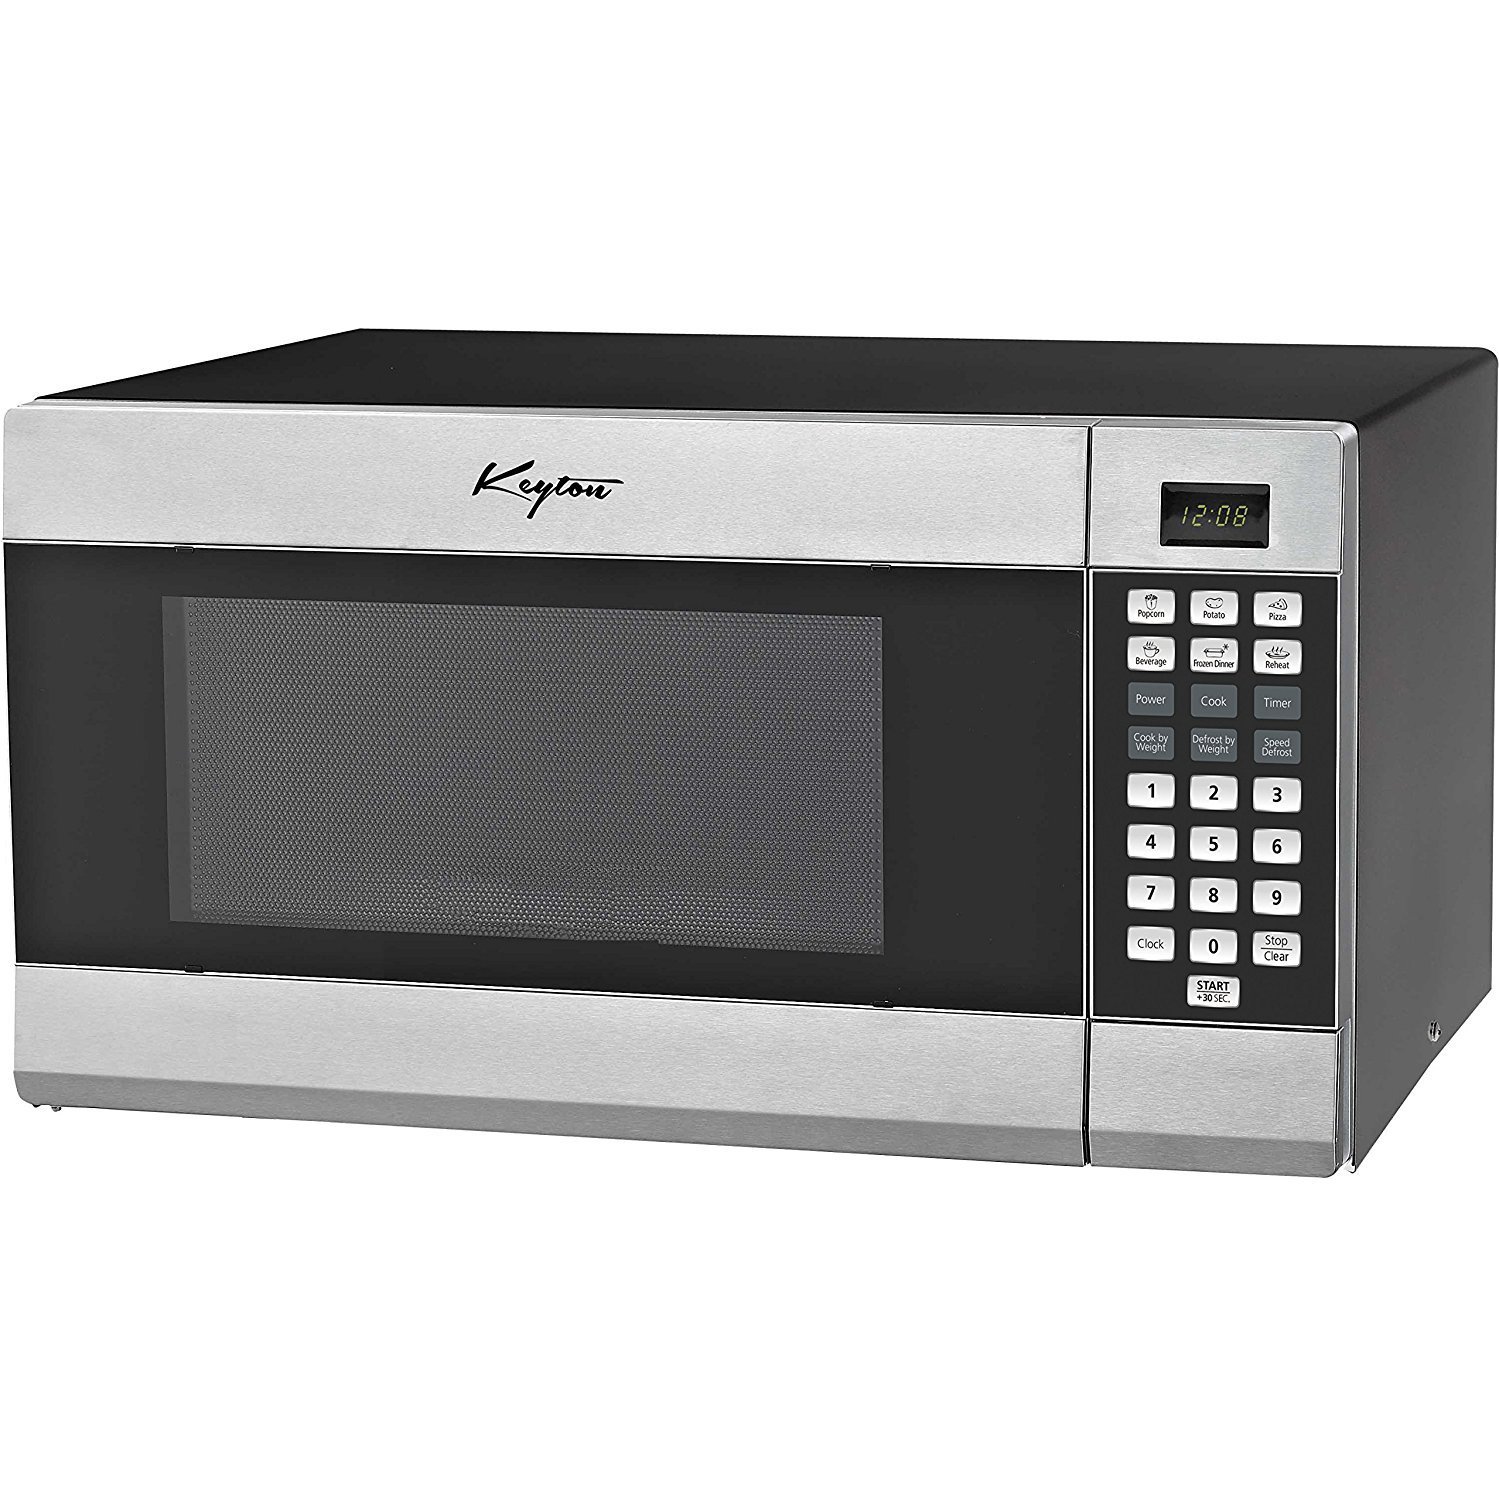 Keyton K-1.1 SS MICROWAVE Microwave Oven with 6 Instant Cooking Settings & 10 Power Levels, Stainless Steel